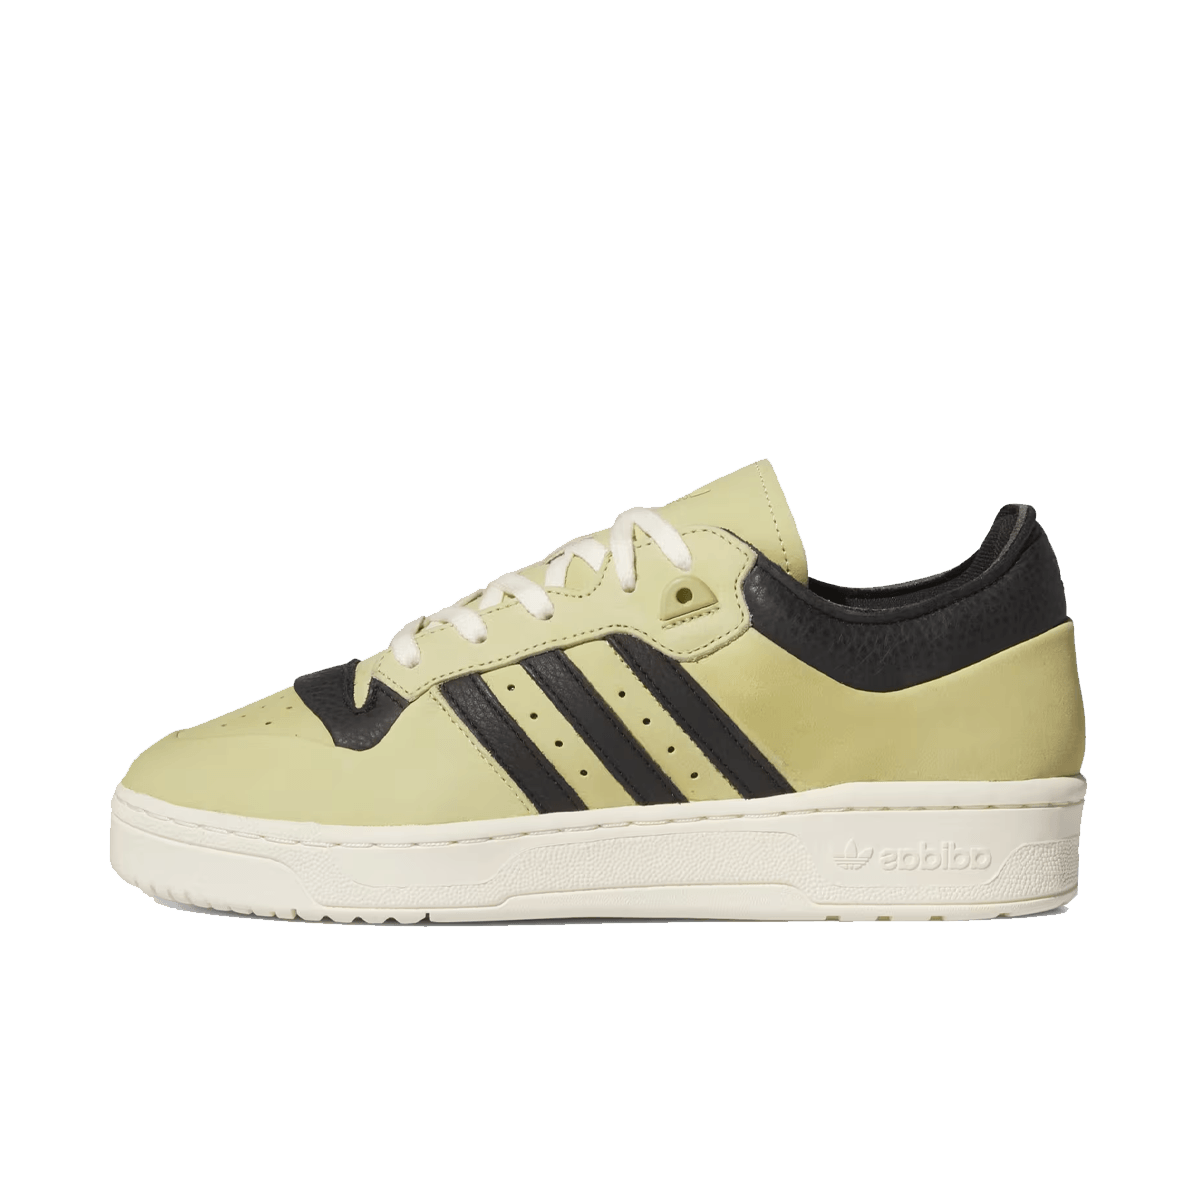 adidas Rivalry 86 Low 001 'Halo Gold'